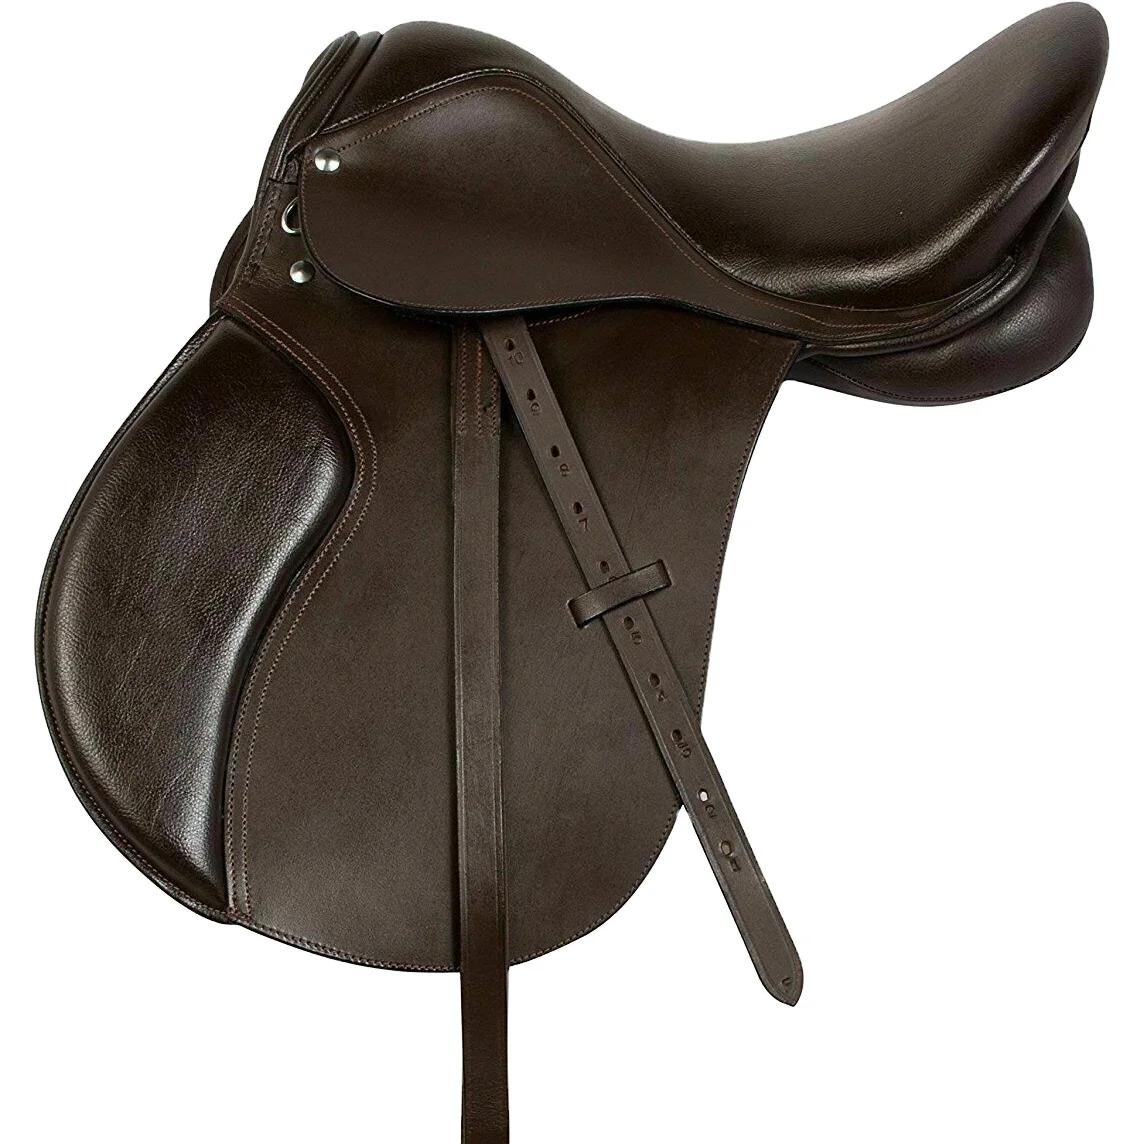 All Purpose Dressage Jumping Close Contact Leather English Horse Saddle Tack. 